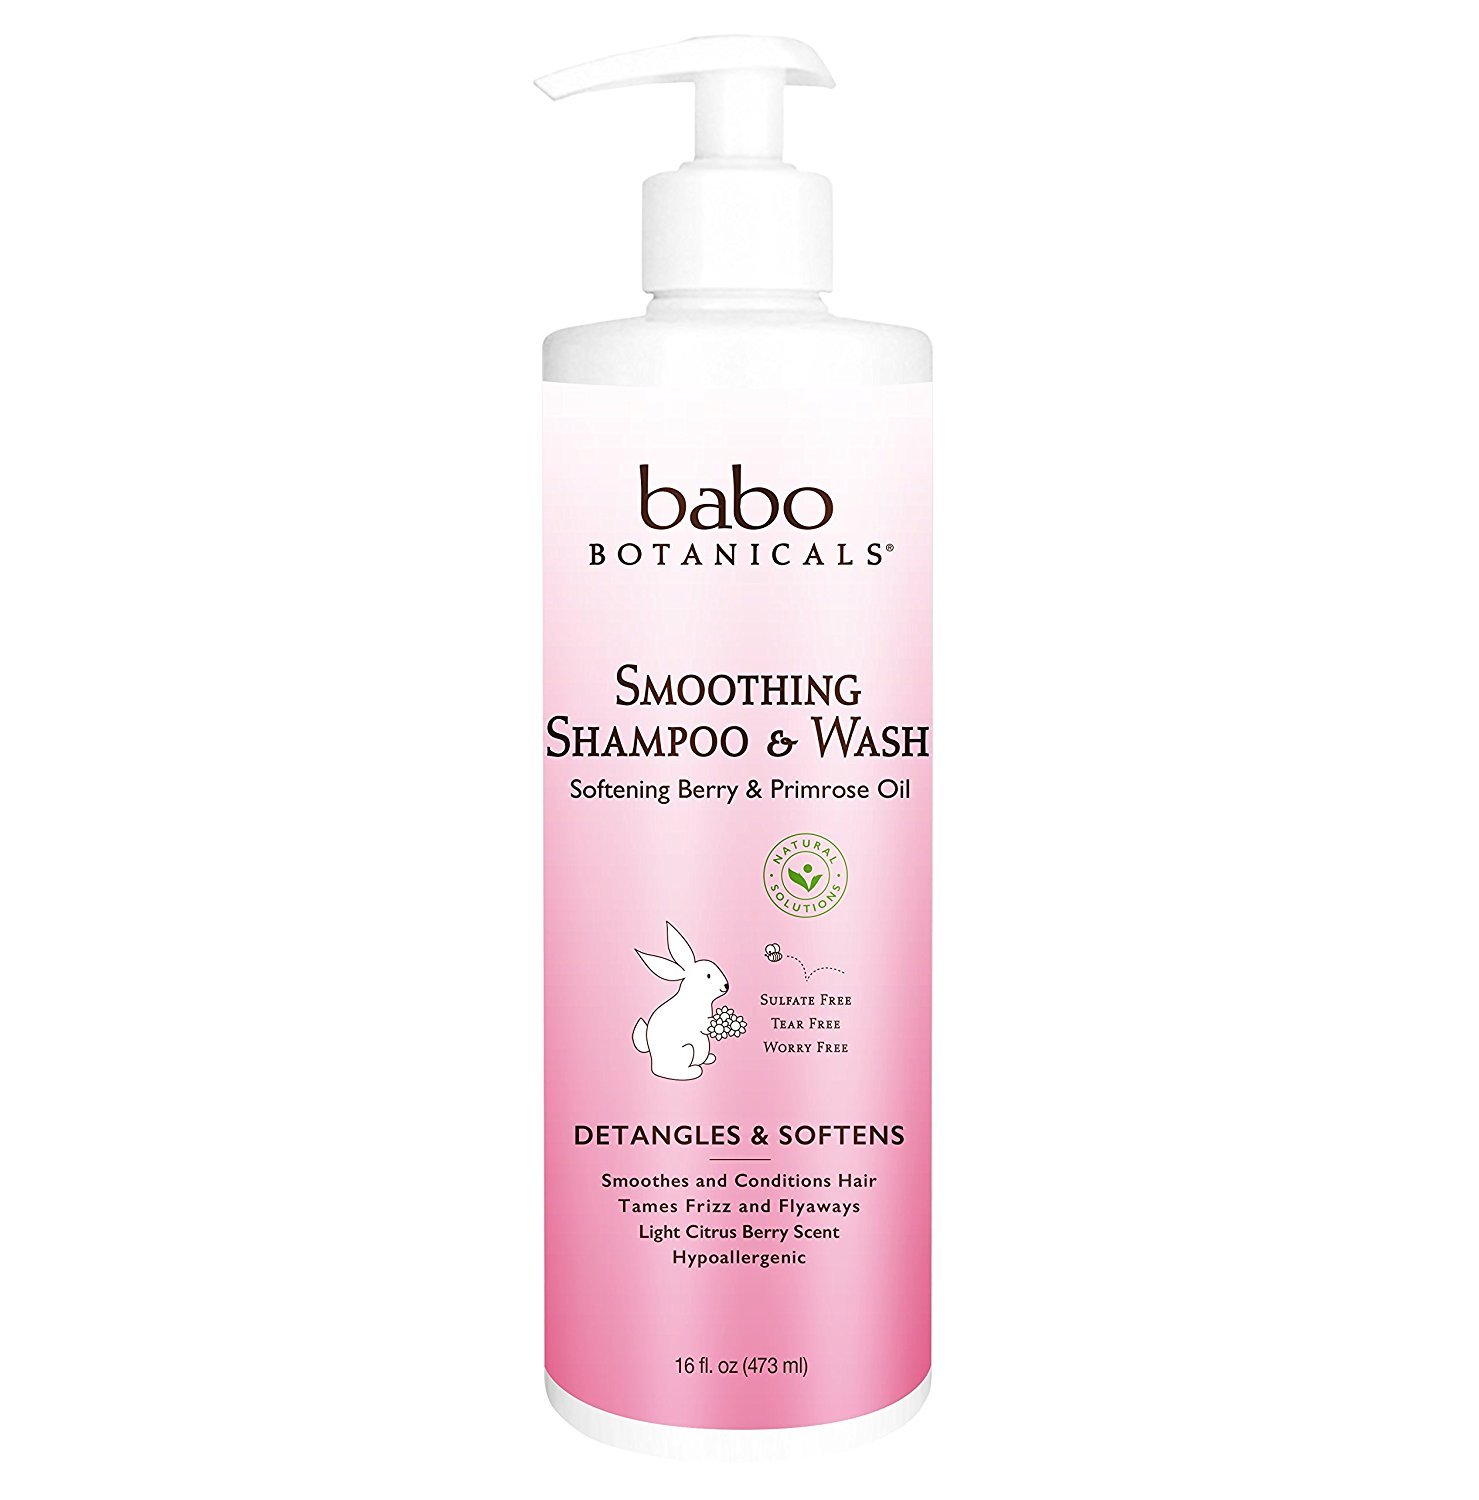 Babo Botanicals Smoothing 2-in-1 Shampoo & Wash with Natural Berry and Evening Primrose oil, Hypoallergenic, Vegan, For Babies and Kids, Berry Primrose, 16 Fl Oz